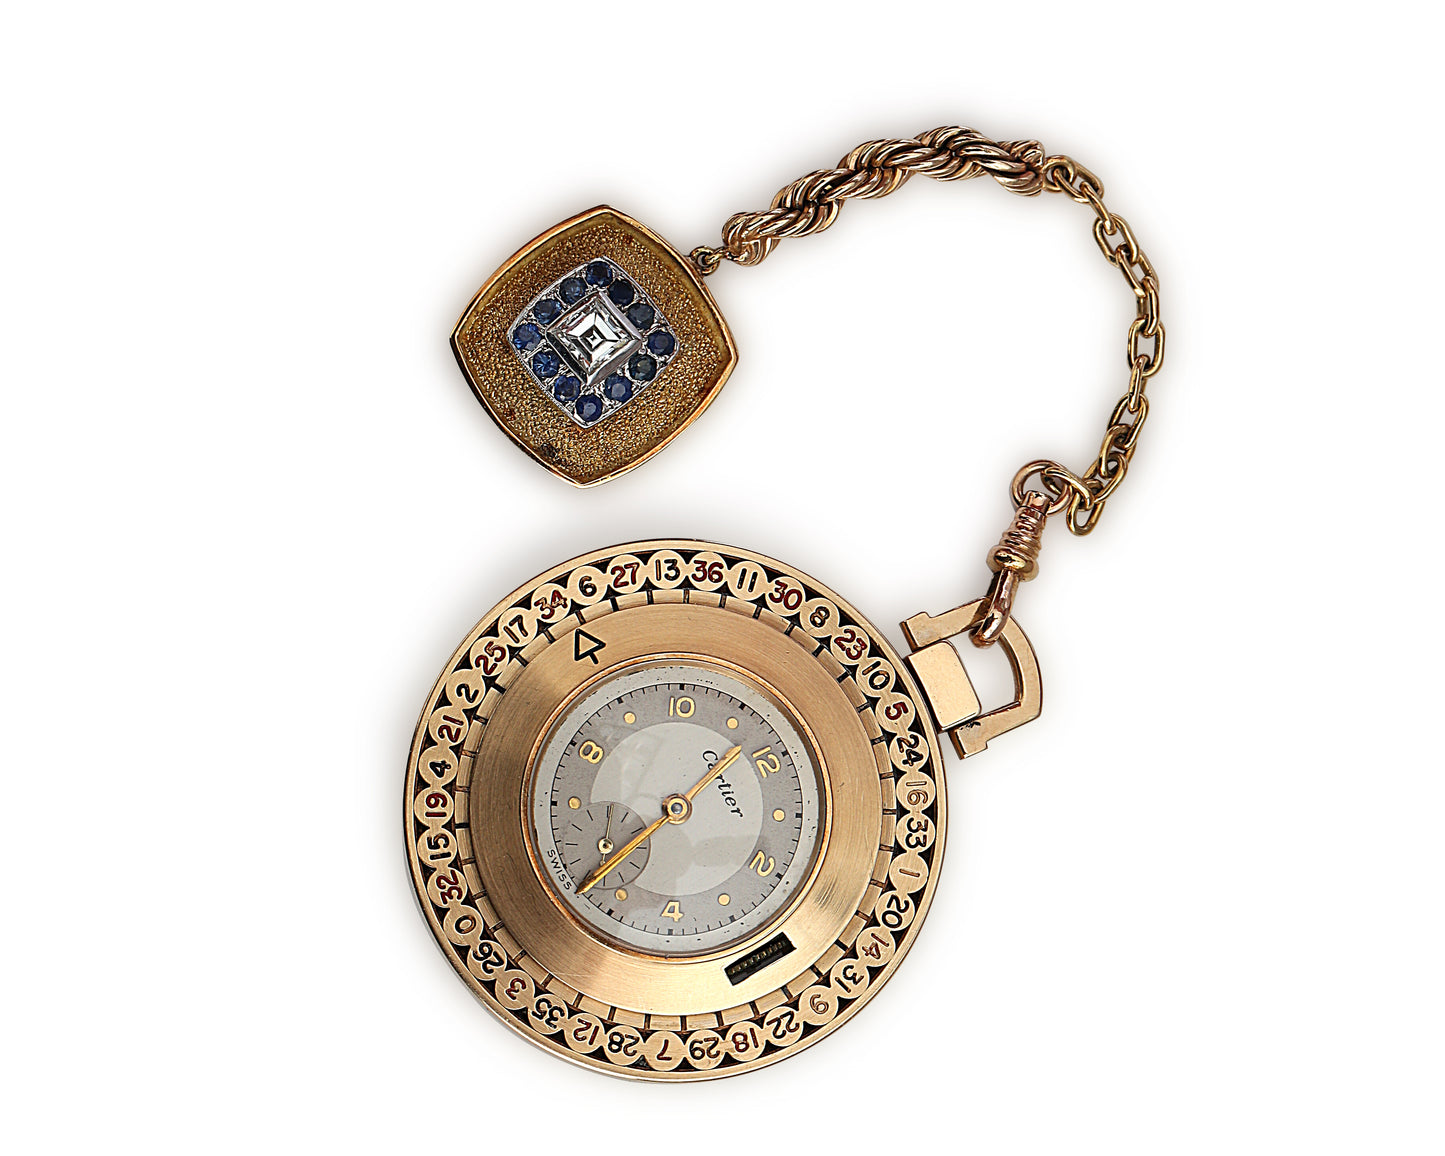 1950s Cartier Roulette pocket watch with diamond fob